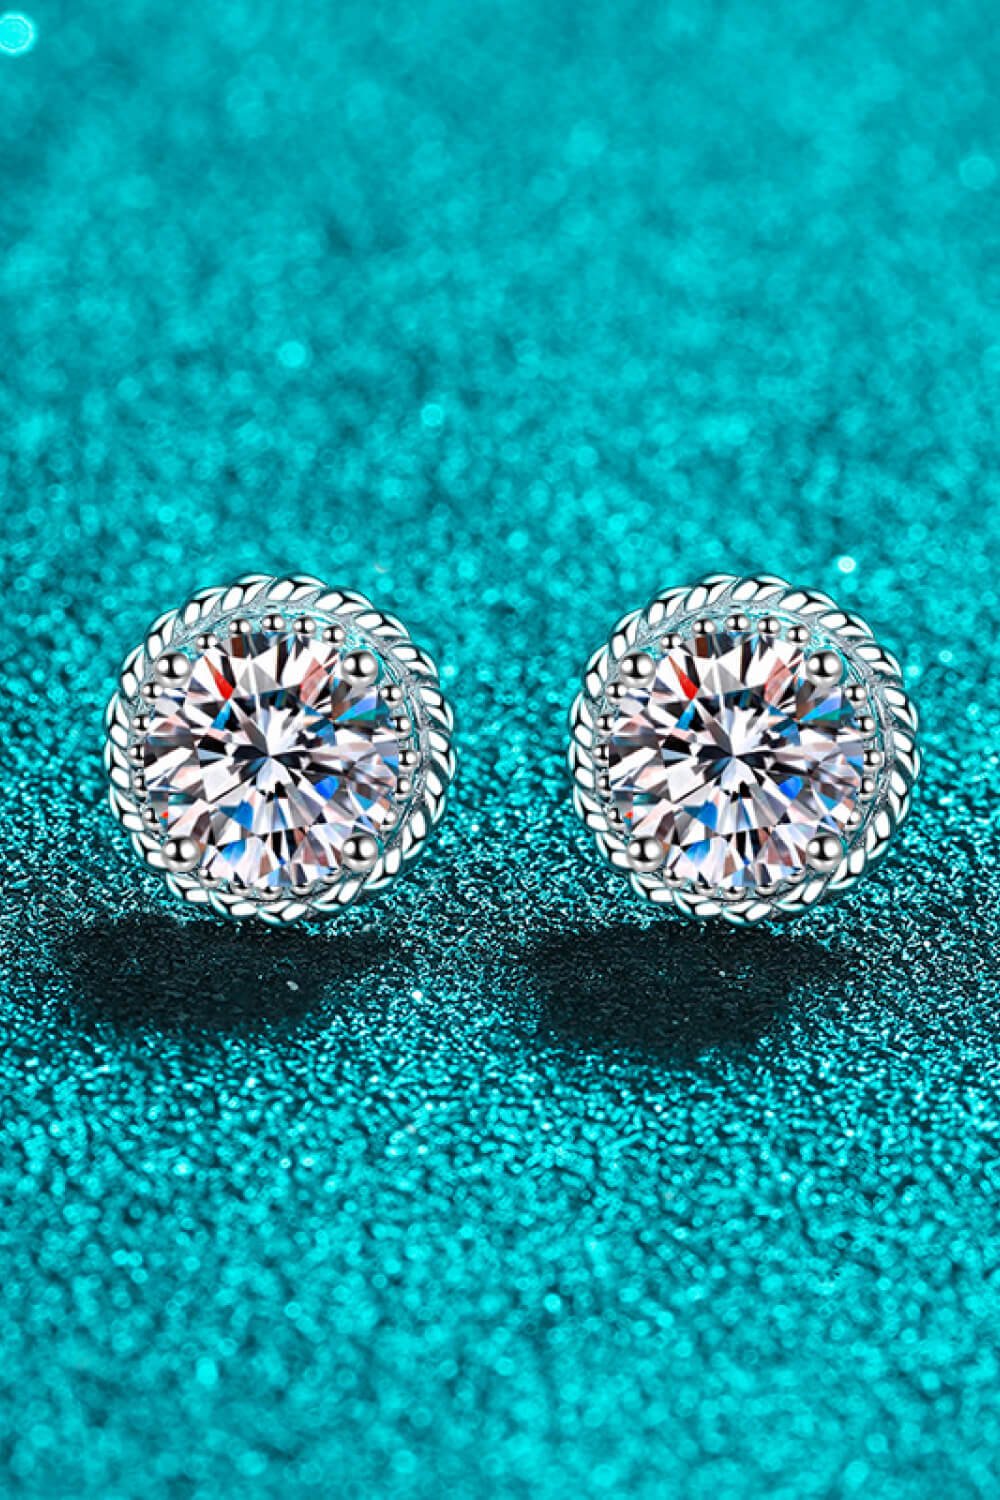 Enchanting Moissanite Stud Earrings - Indulge in the Magical Allure of Timeless Romance - Luxurious Sophistication for Any Occasion - Guy Christopher